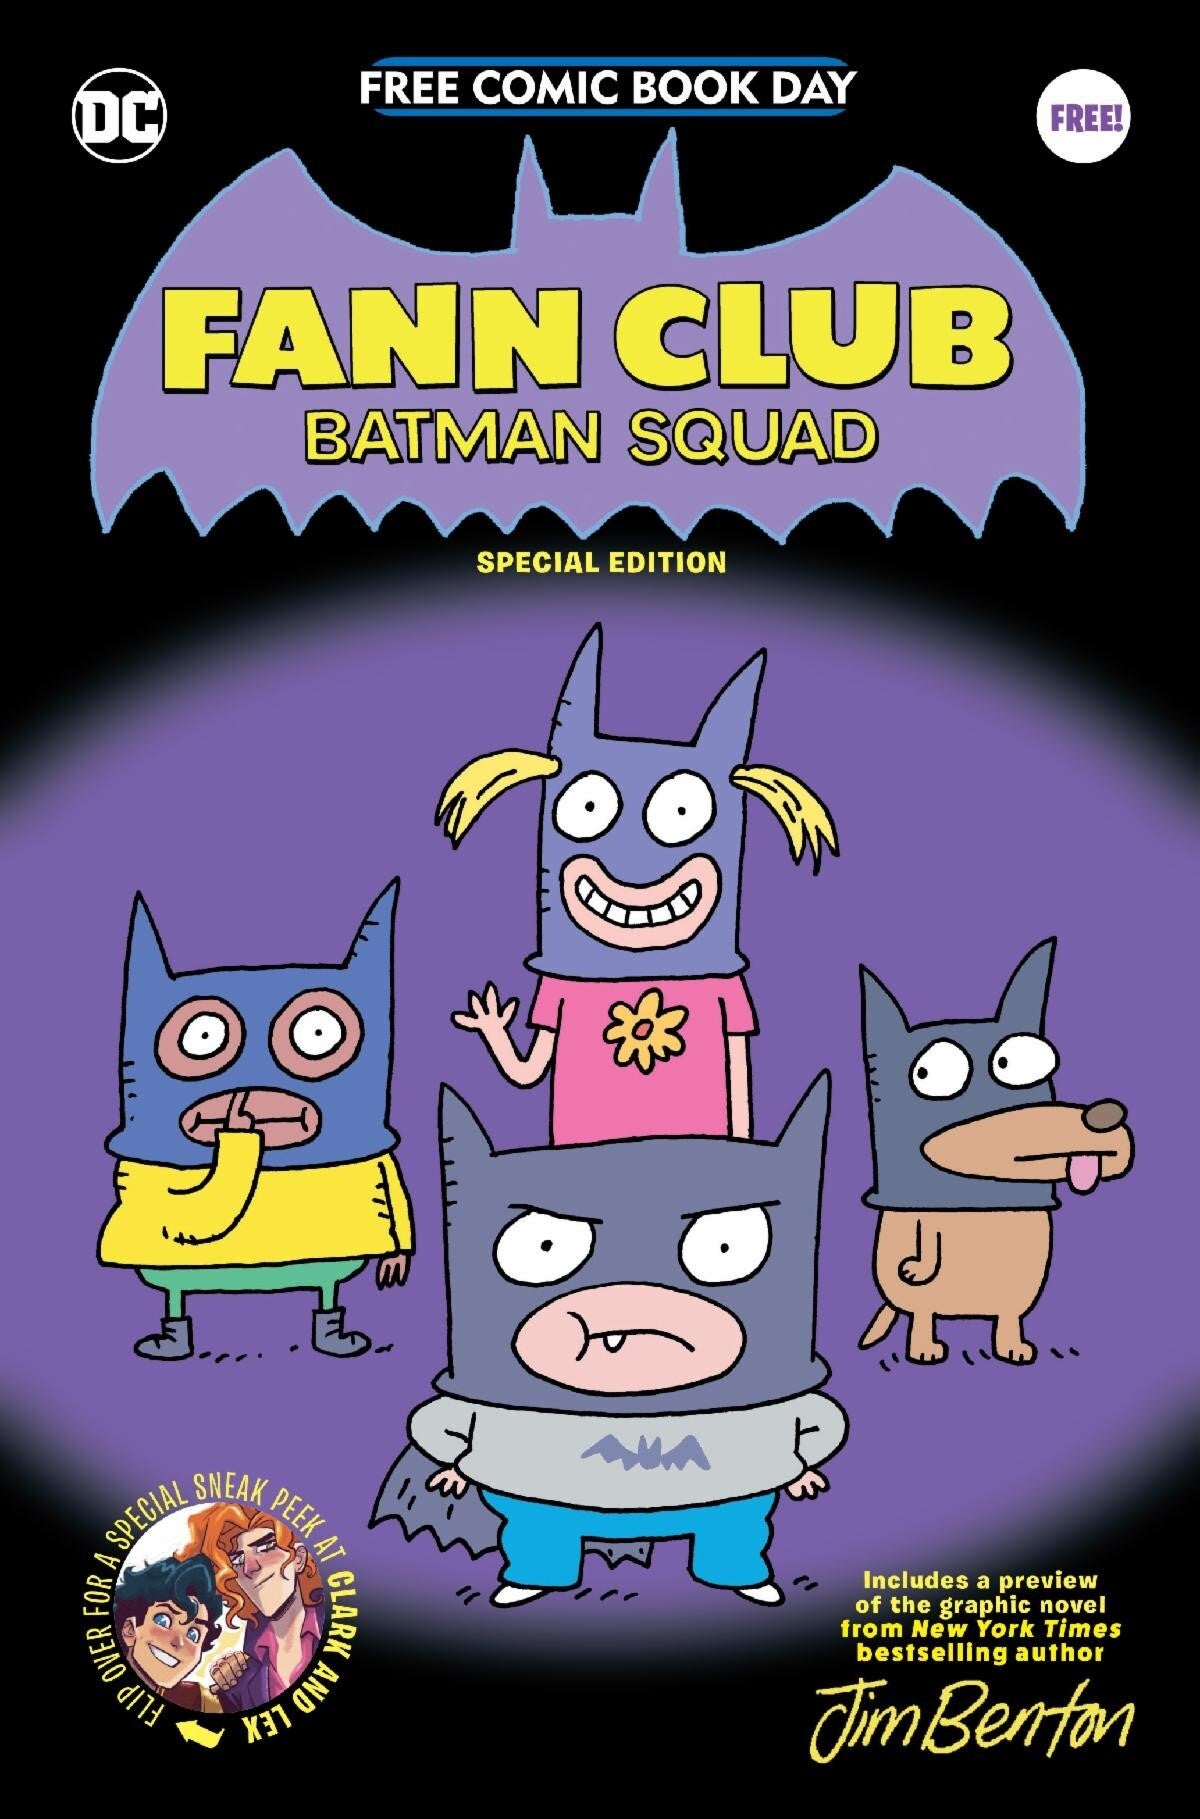 Cover of Fann Club Free Comic Book Day comic with main characters wearing batman cowls